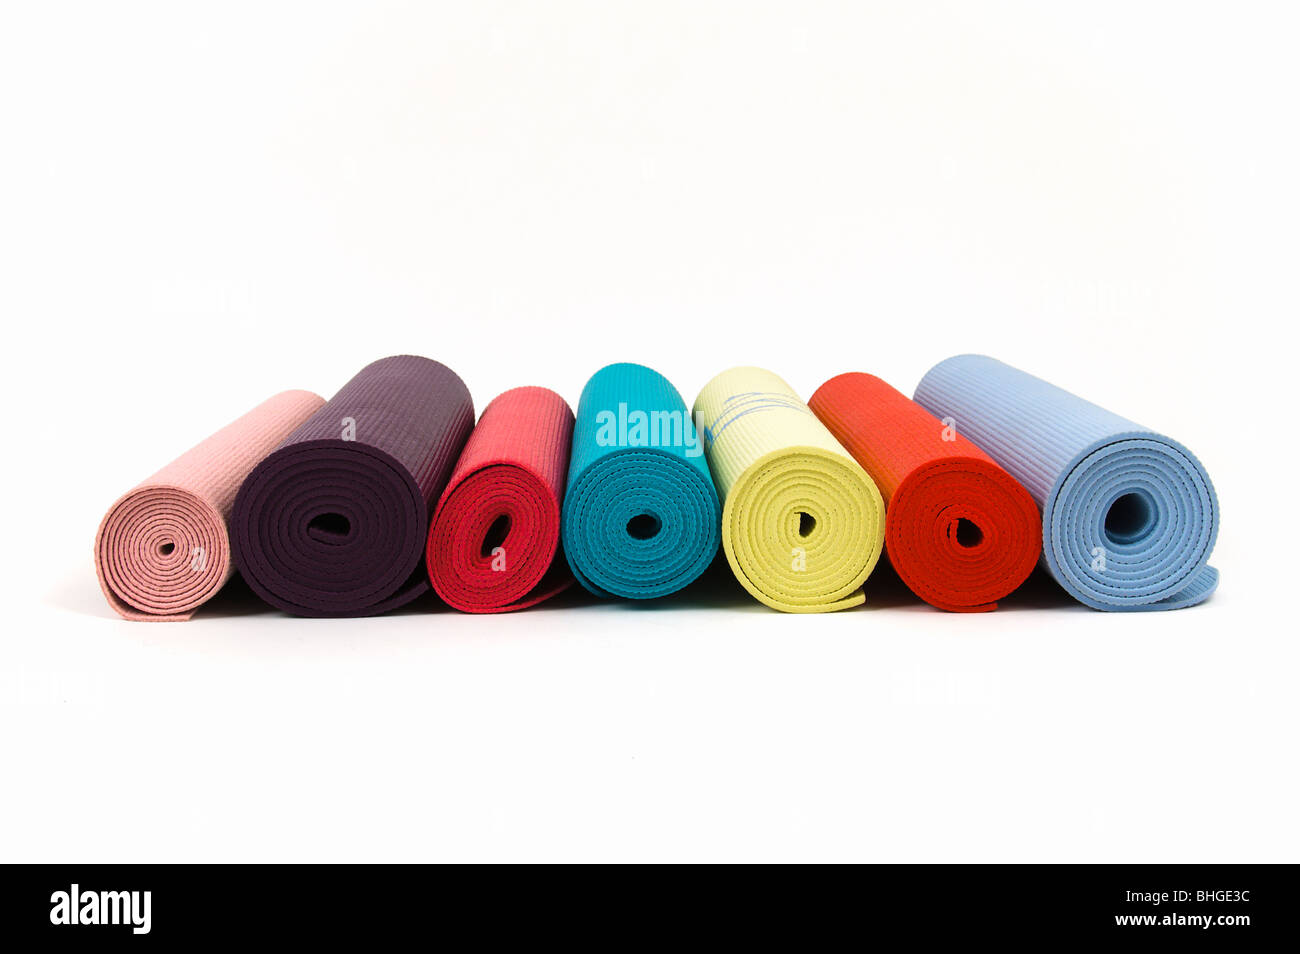 Yoga mats in various colors. Stock Photo